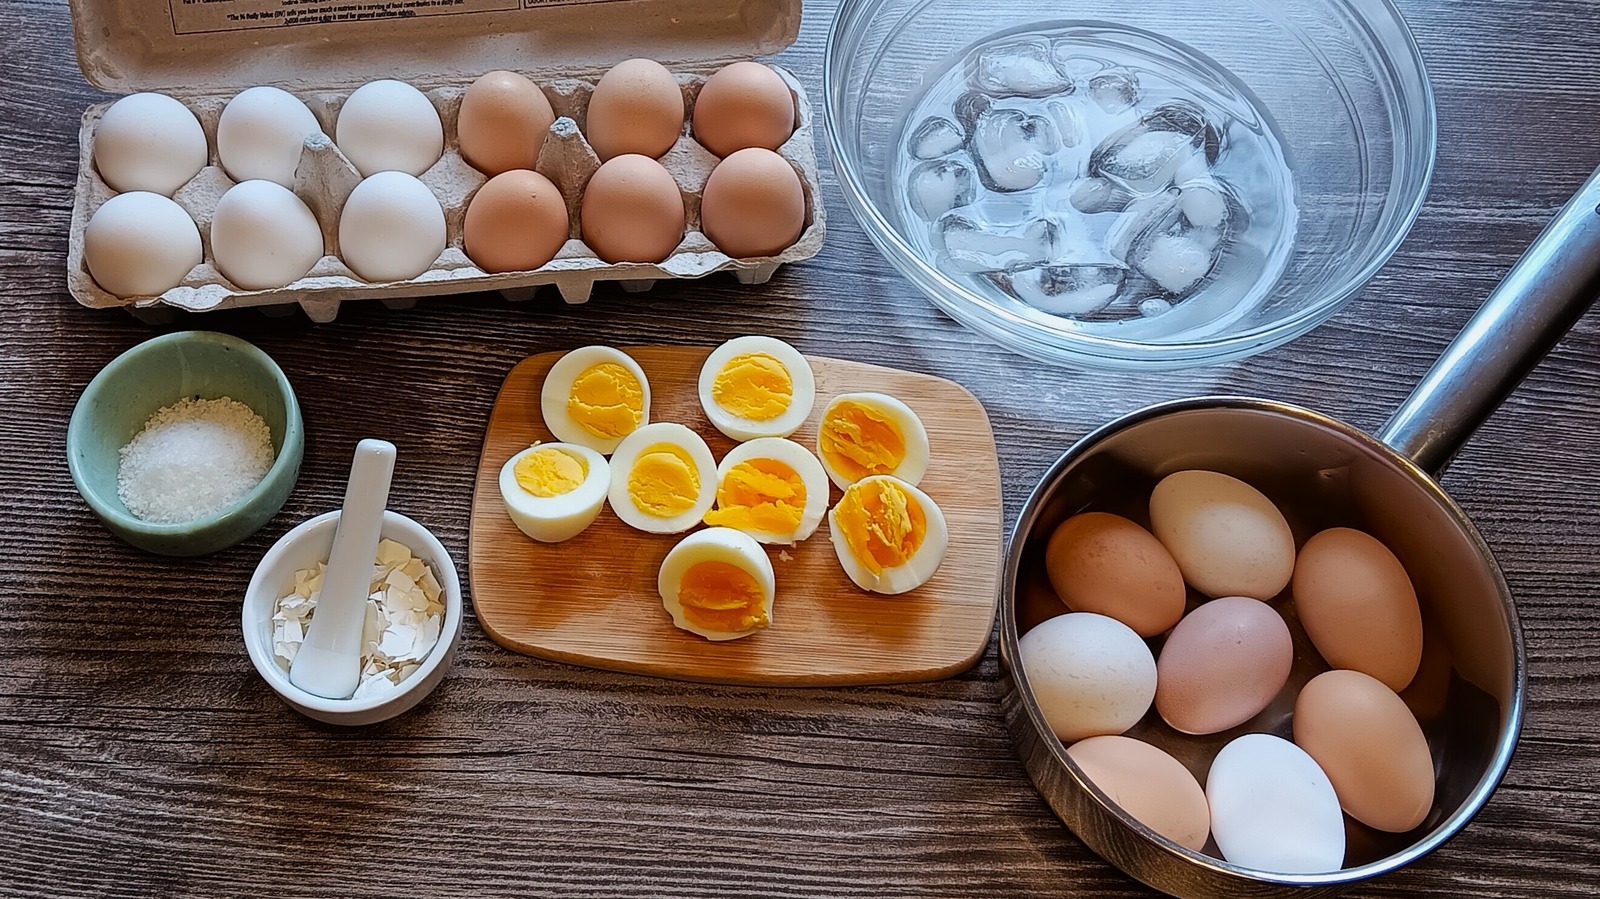 https://www.tastingtable.com/img/gallery/your-ultimate-guide-for-boiled-eggs-with-the-yolk-texture-you-want/l-intro-1702985826.jpg